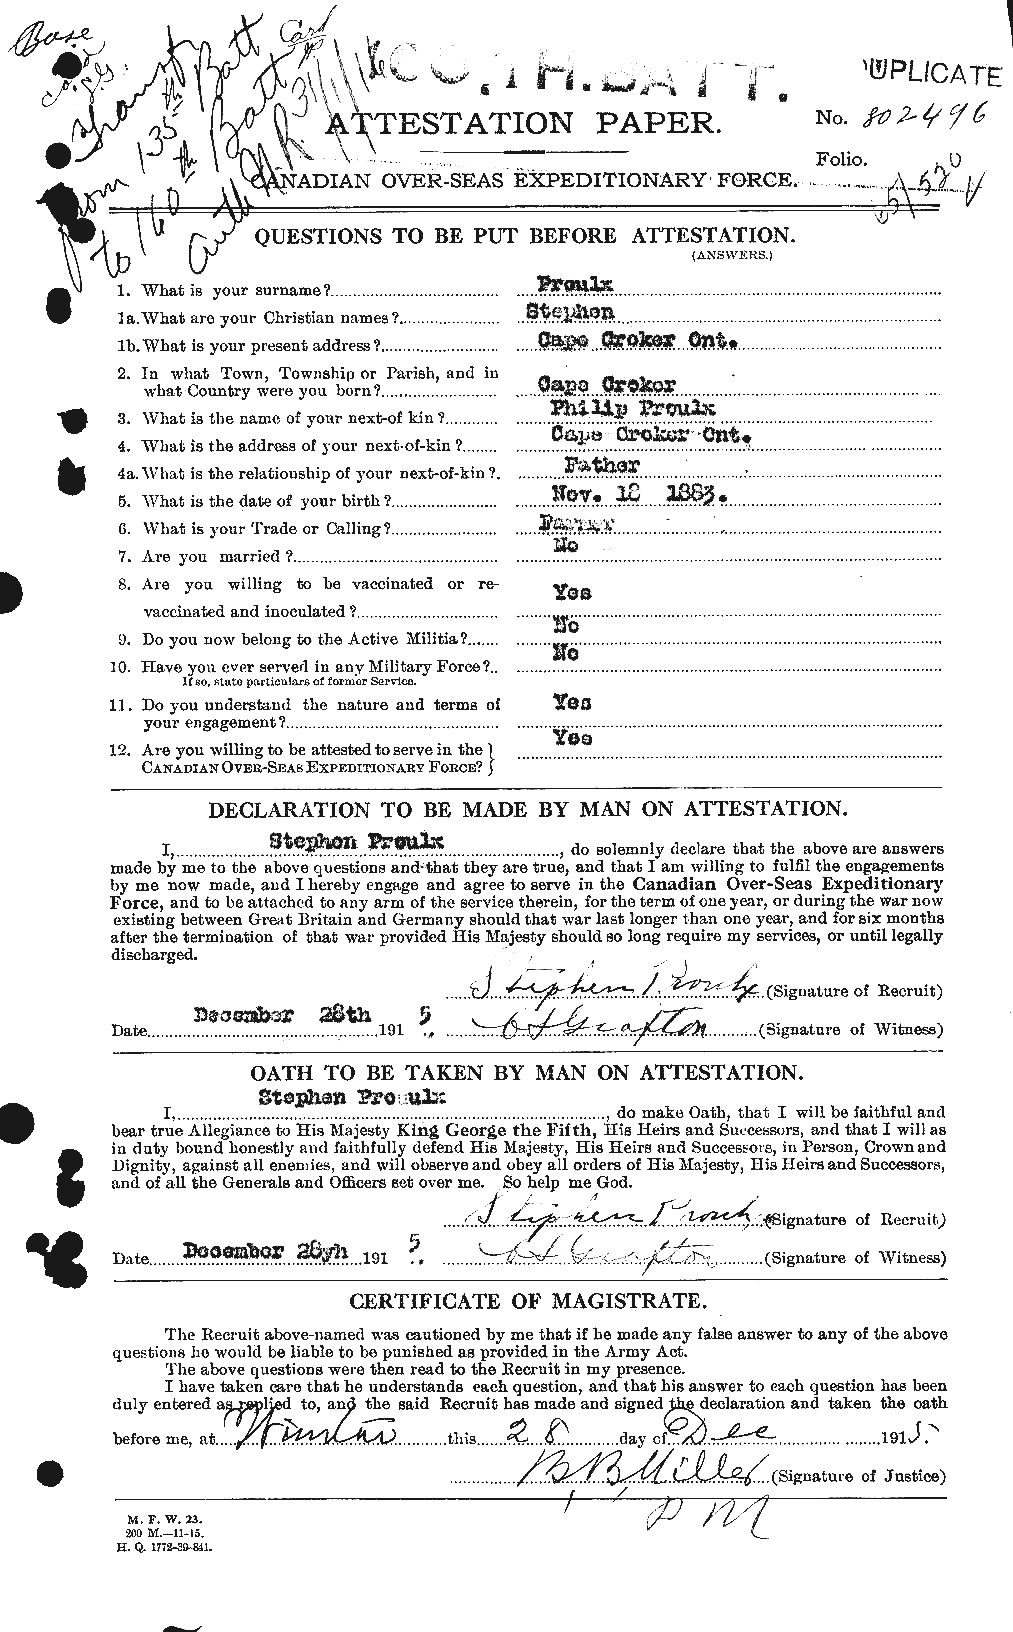 Personnel Records of the First World War - CEF 587635a